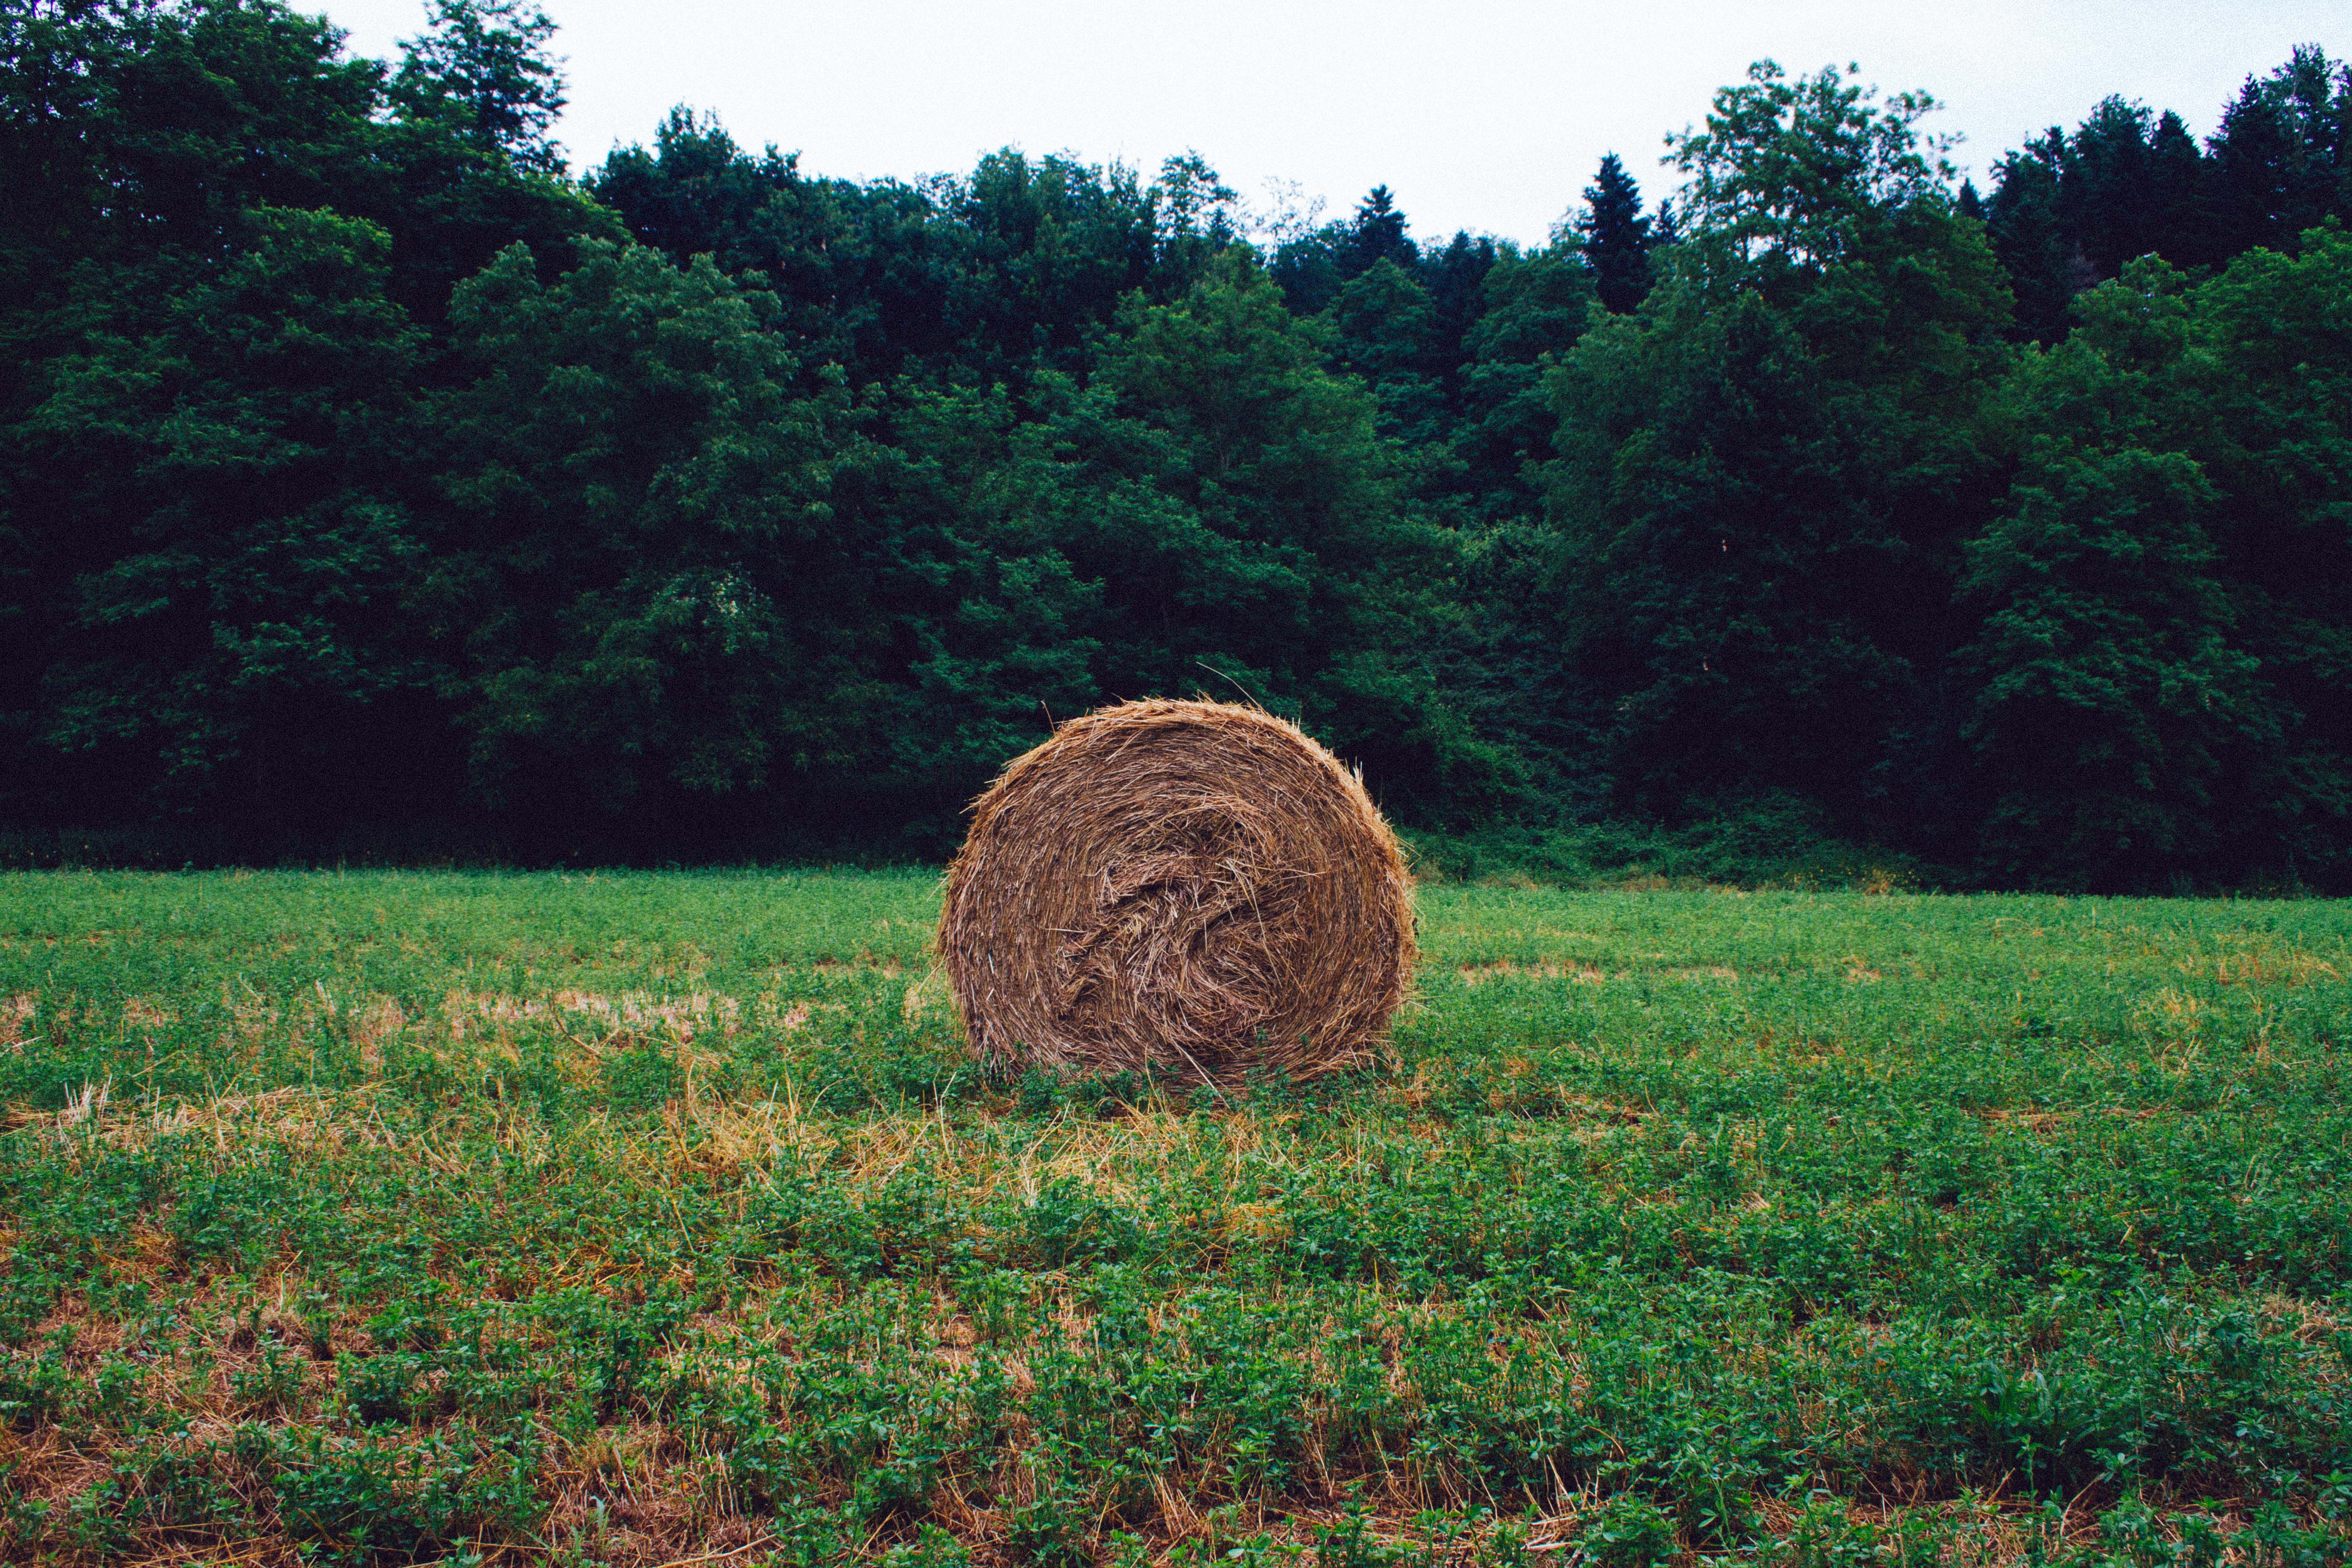 Popular Hay images for mobile phone